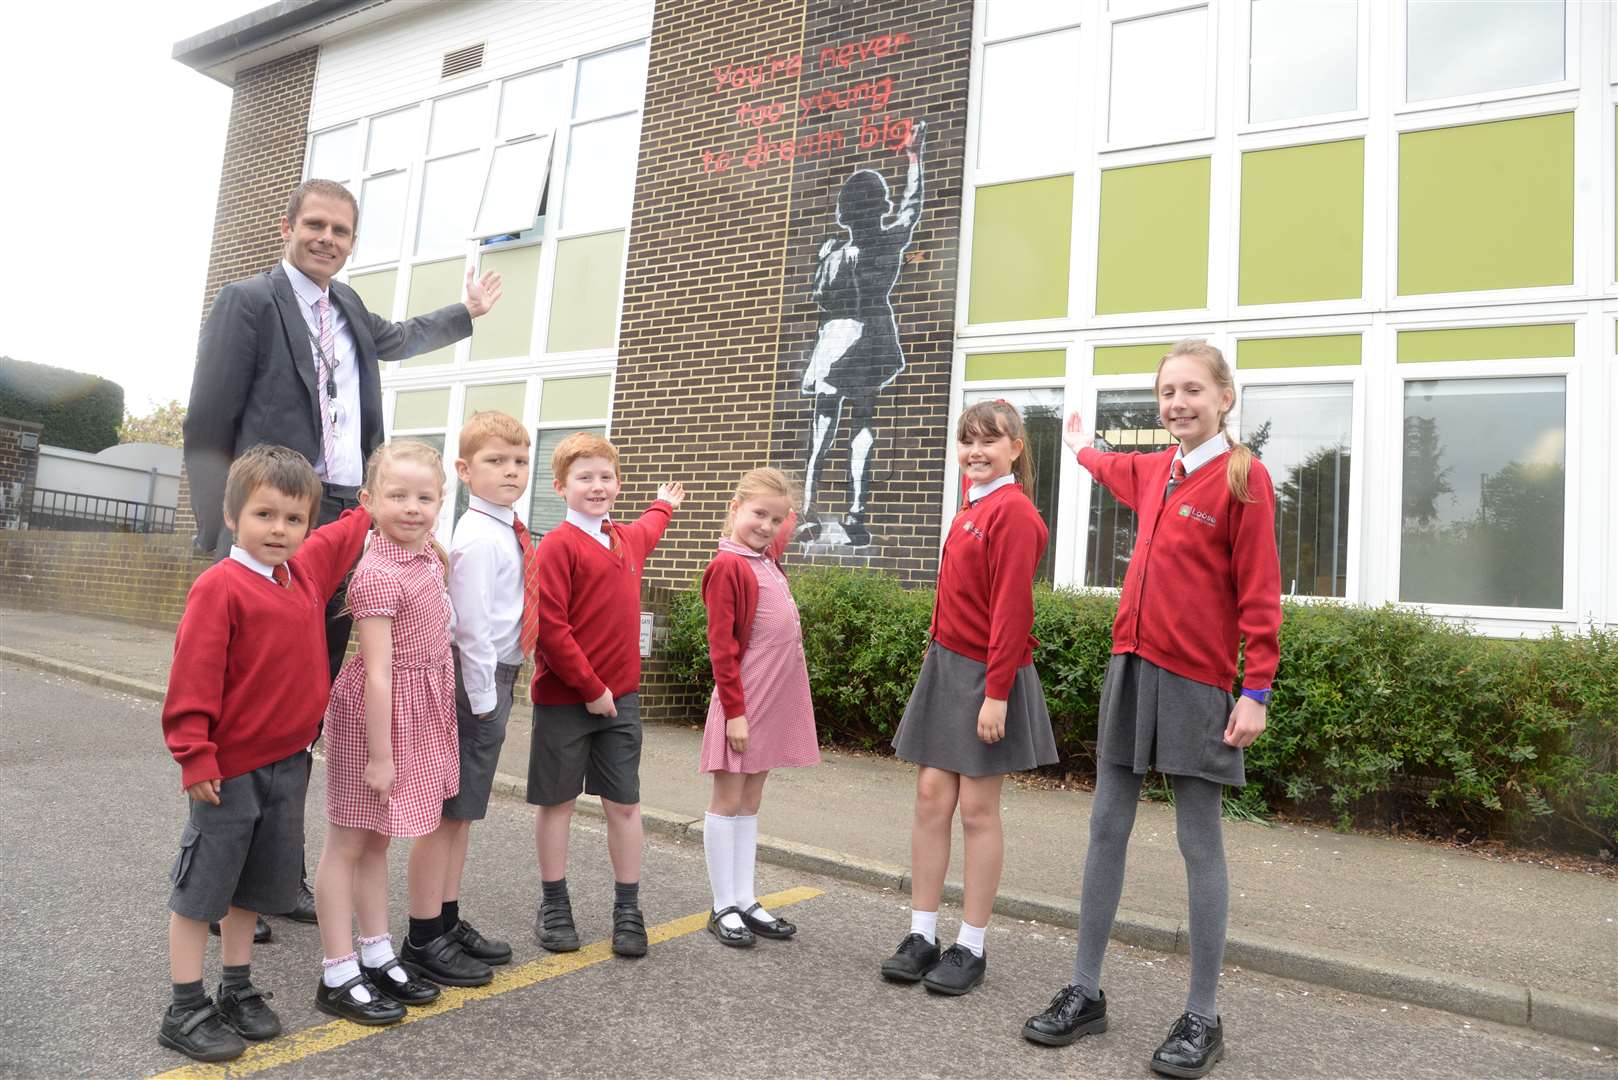 Darren Webb, Executive Head, with some of his pupils and the Banksy style graffiti at Loose Primary School. Picture: Chris Davey